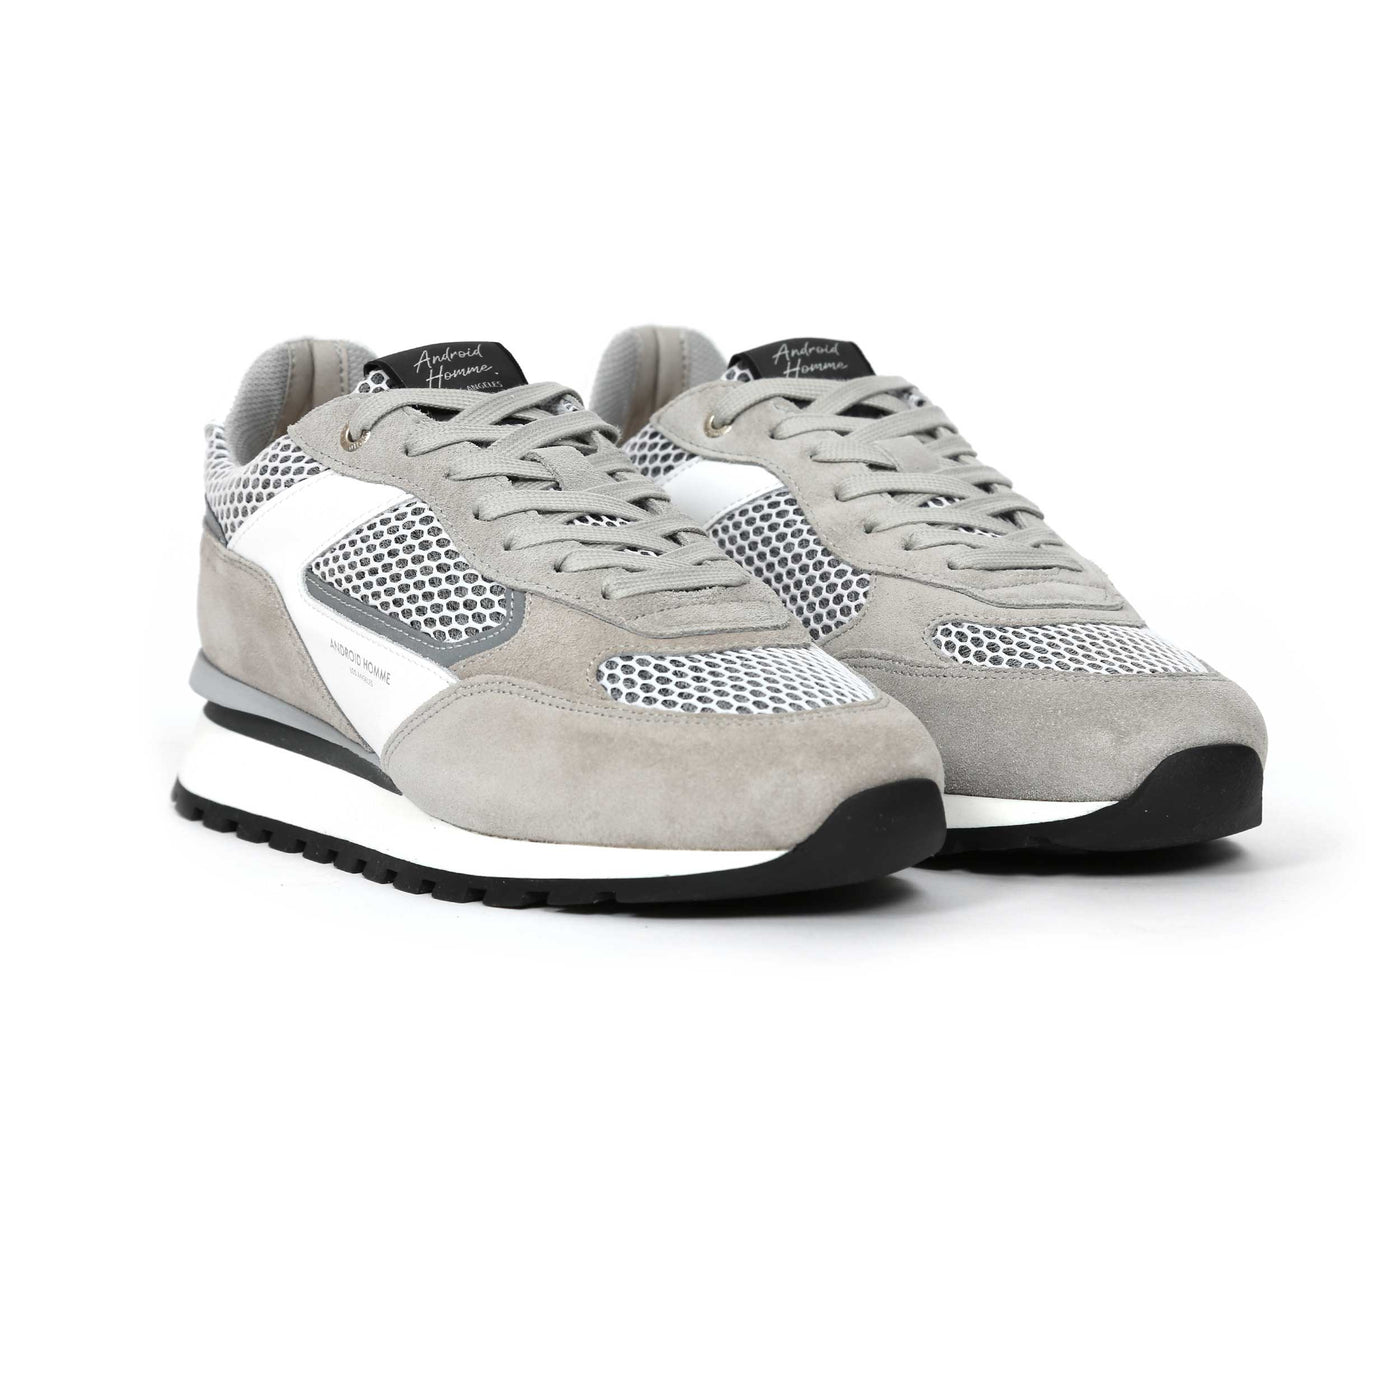 Android Homme Lechuza Racer Trainer in White Grey Pair